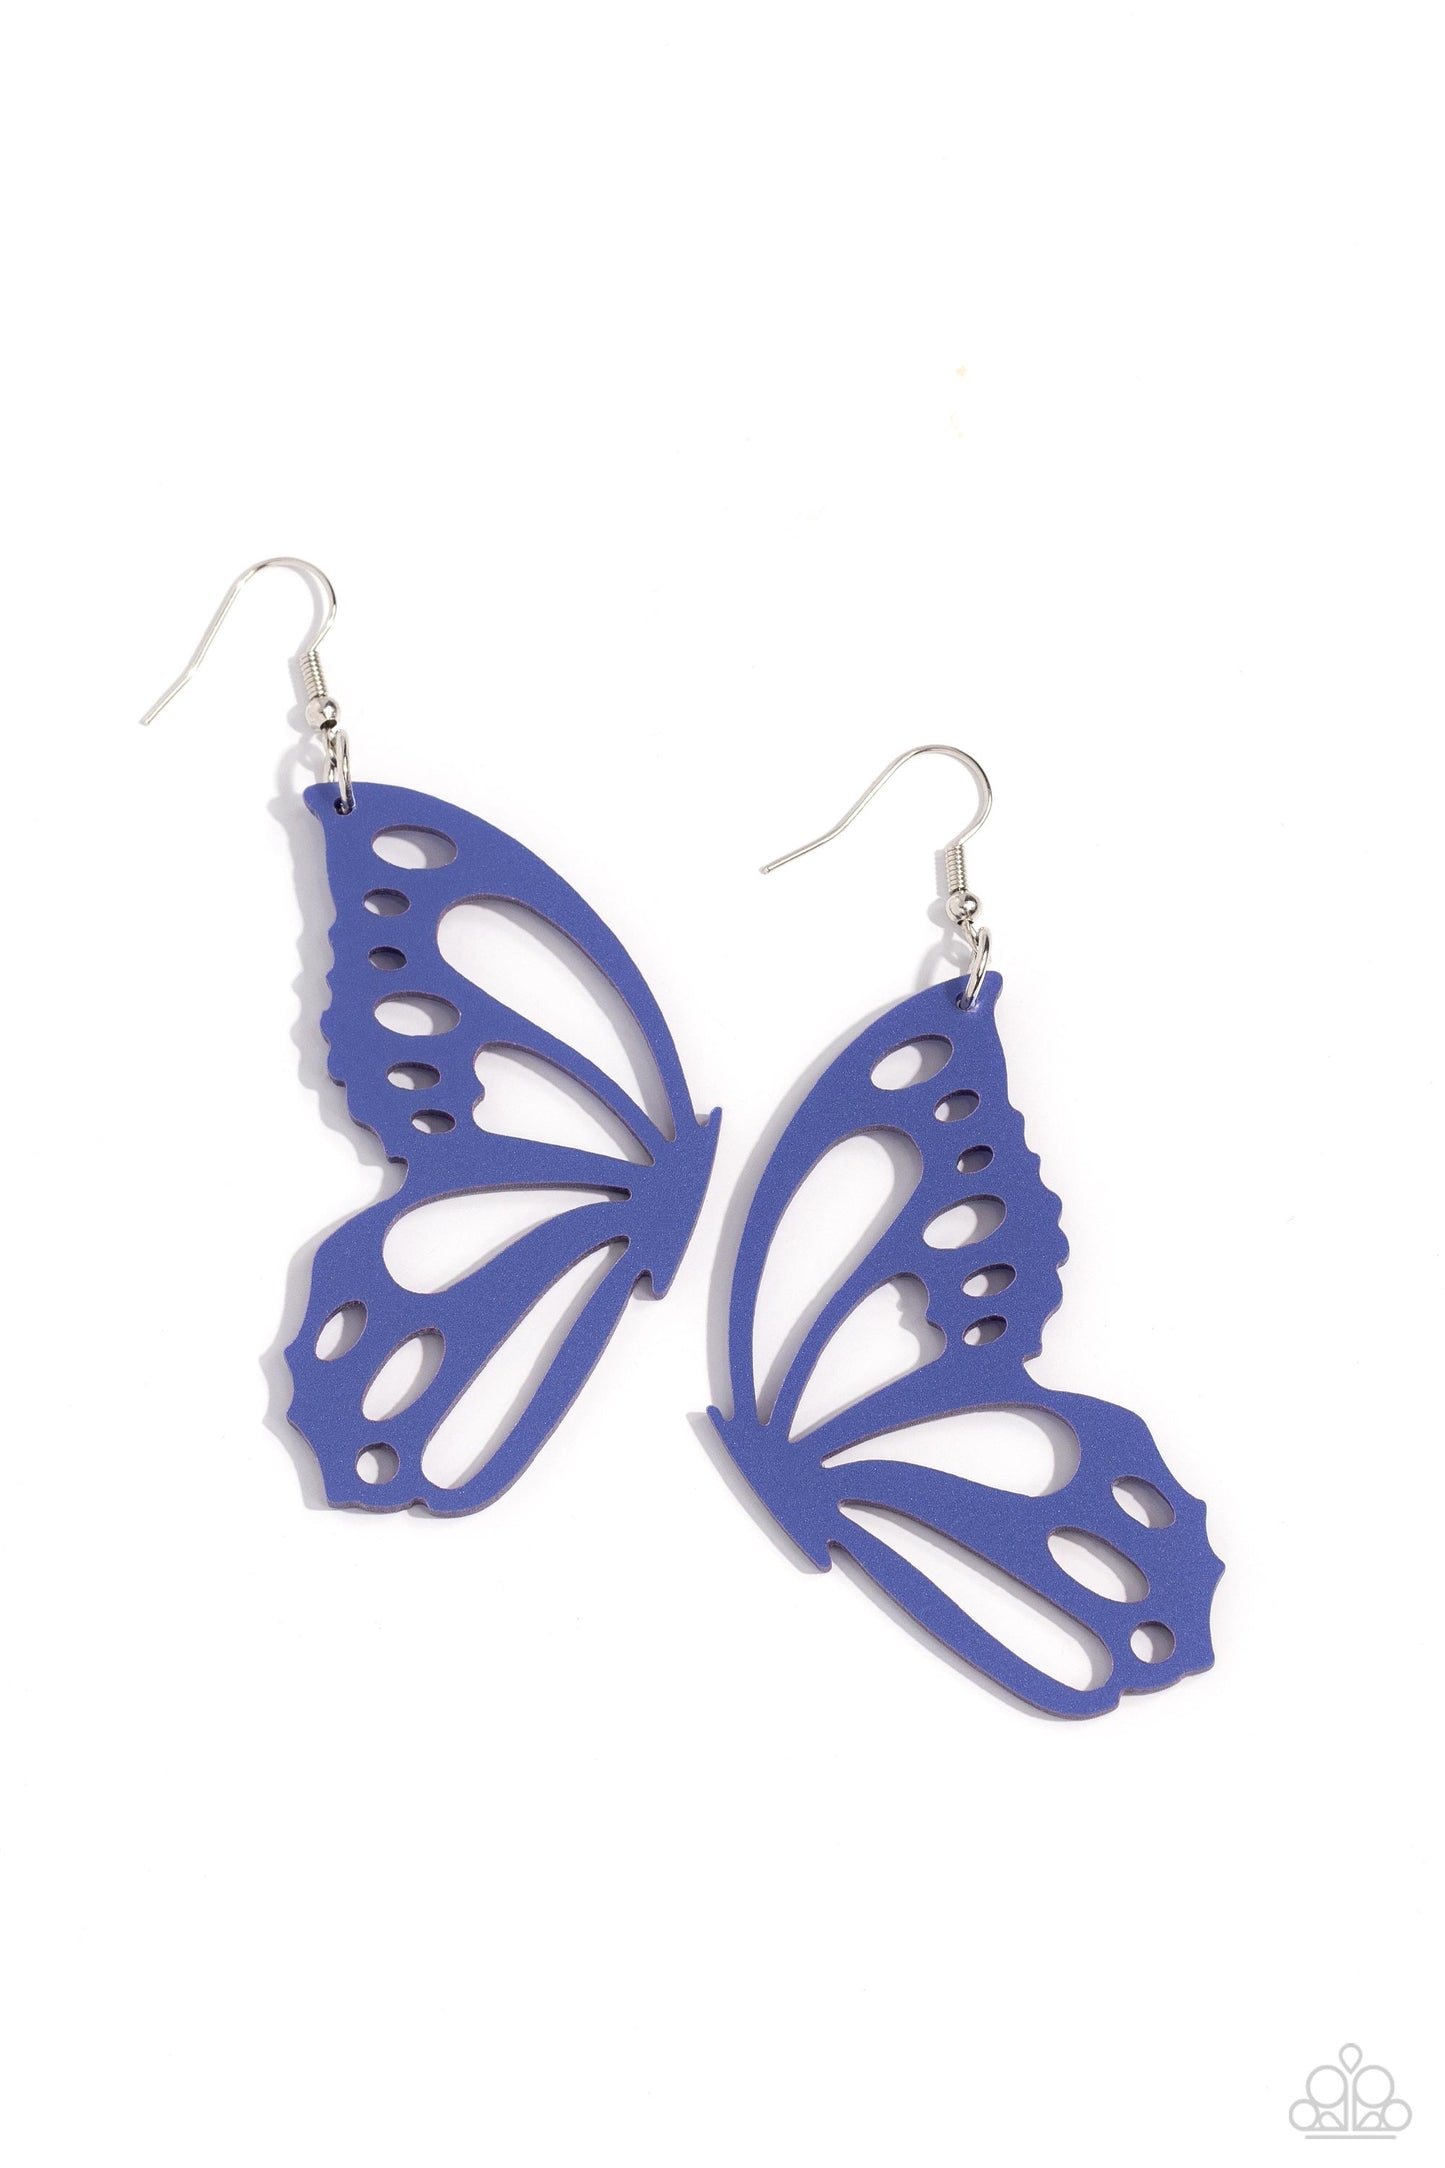 Splashed in a metallic Persian Jewel hue, an oversized butterfly wing with airy cutout details dangles from the ear, creating a whimsically colorful sight. Earring attaches to a standard fishhook fitting.  Sold as one pair of earrings.